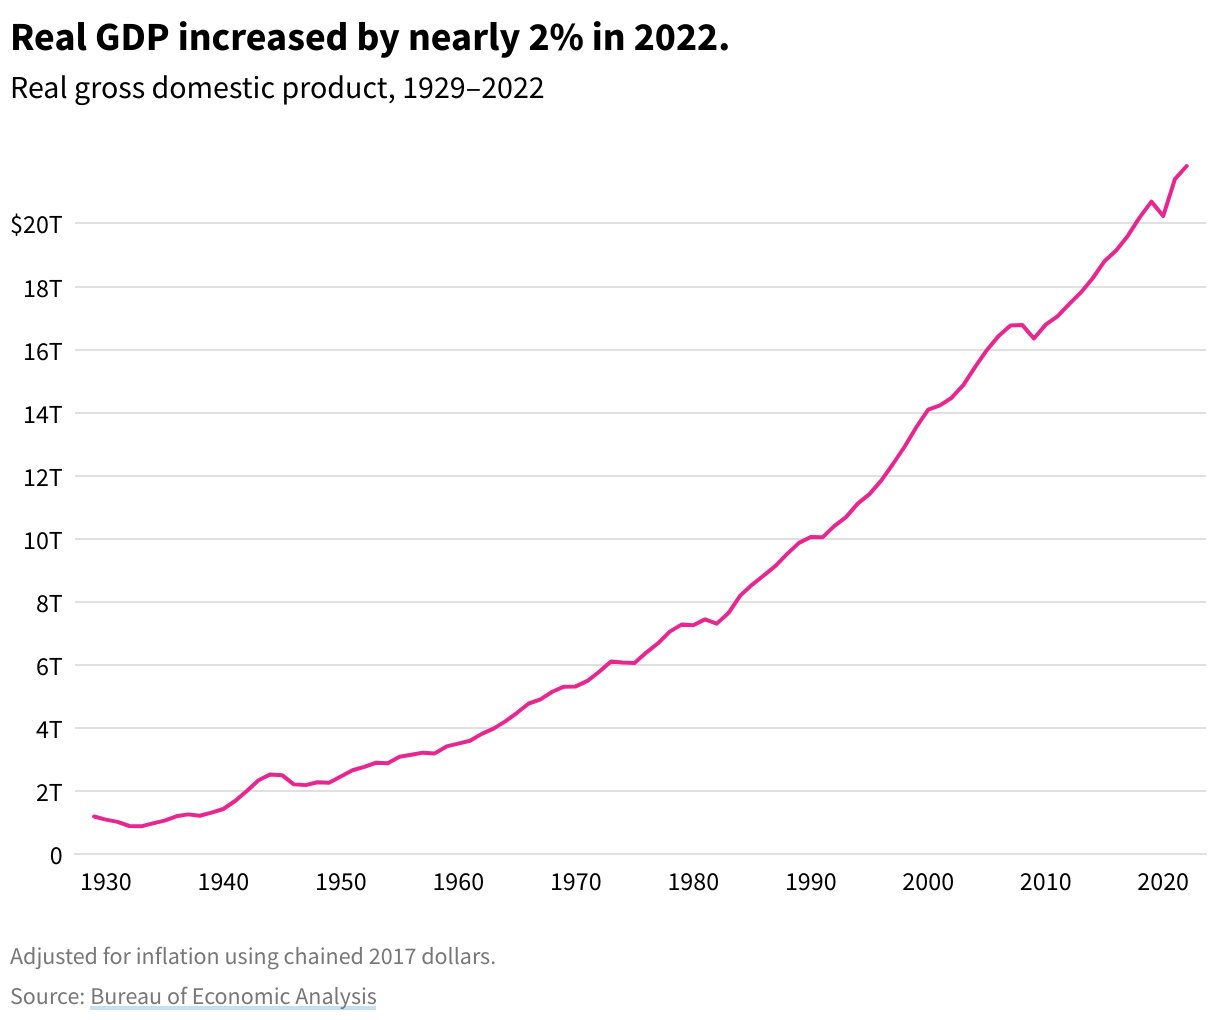 Graph showing Real Gross Domestic Product (GDP), adjusted for inflation (2017 Chained Dollars). Real US gross domestic product increased nearly 2% in 2022.